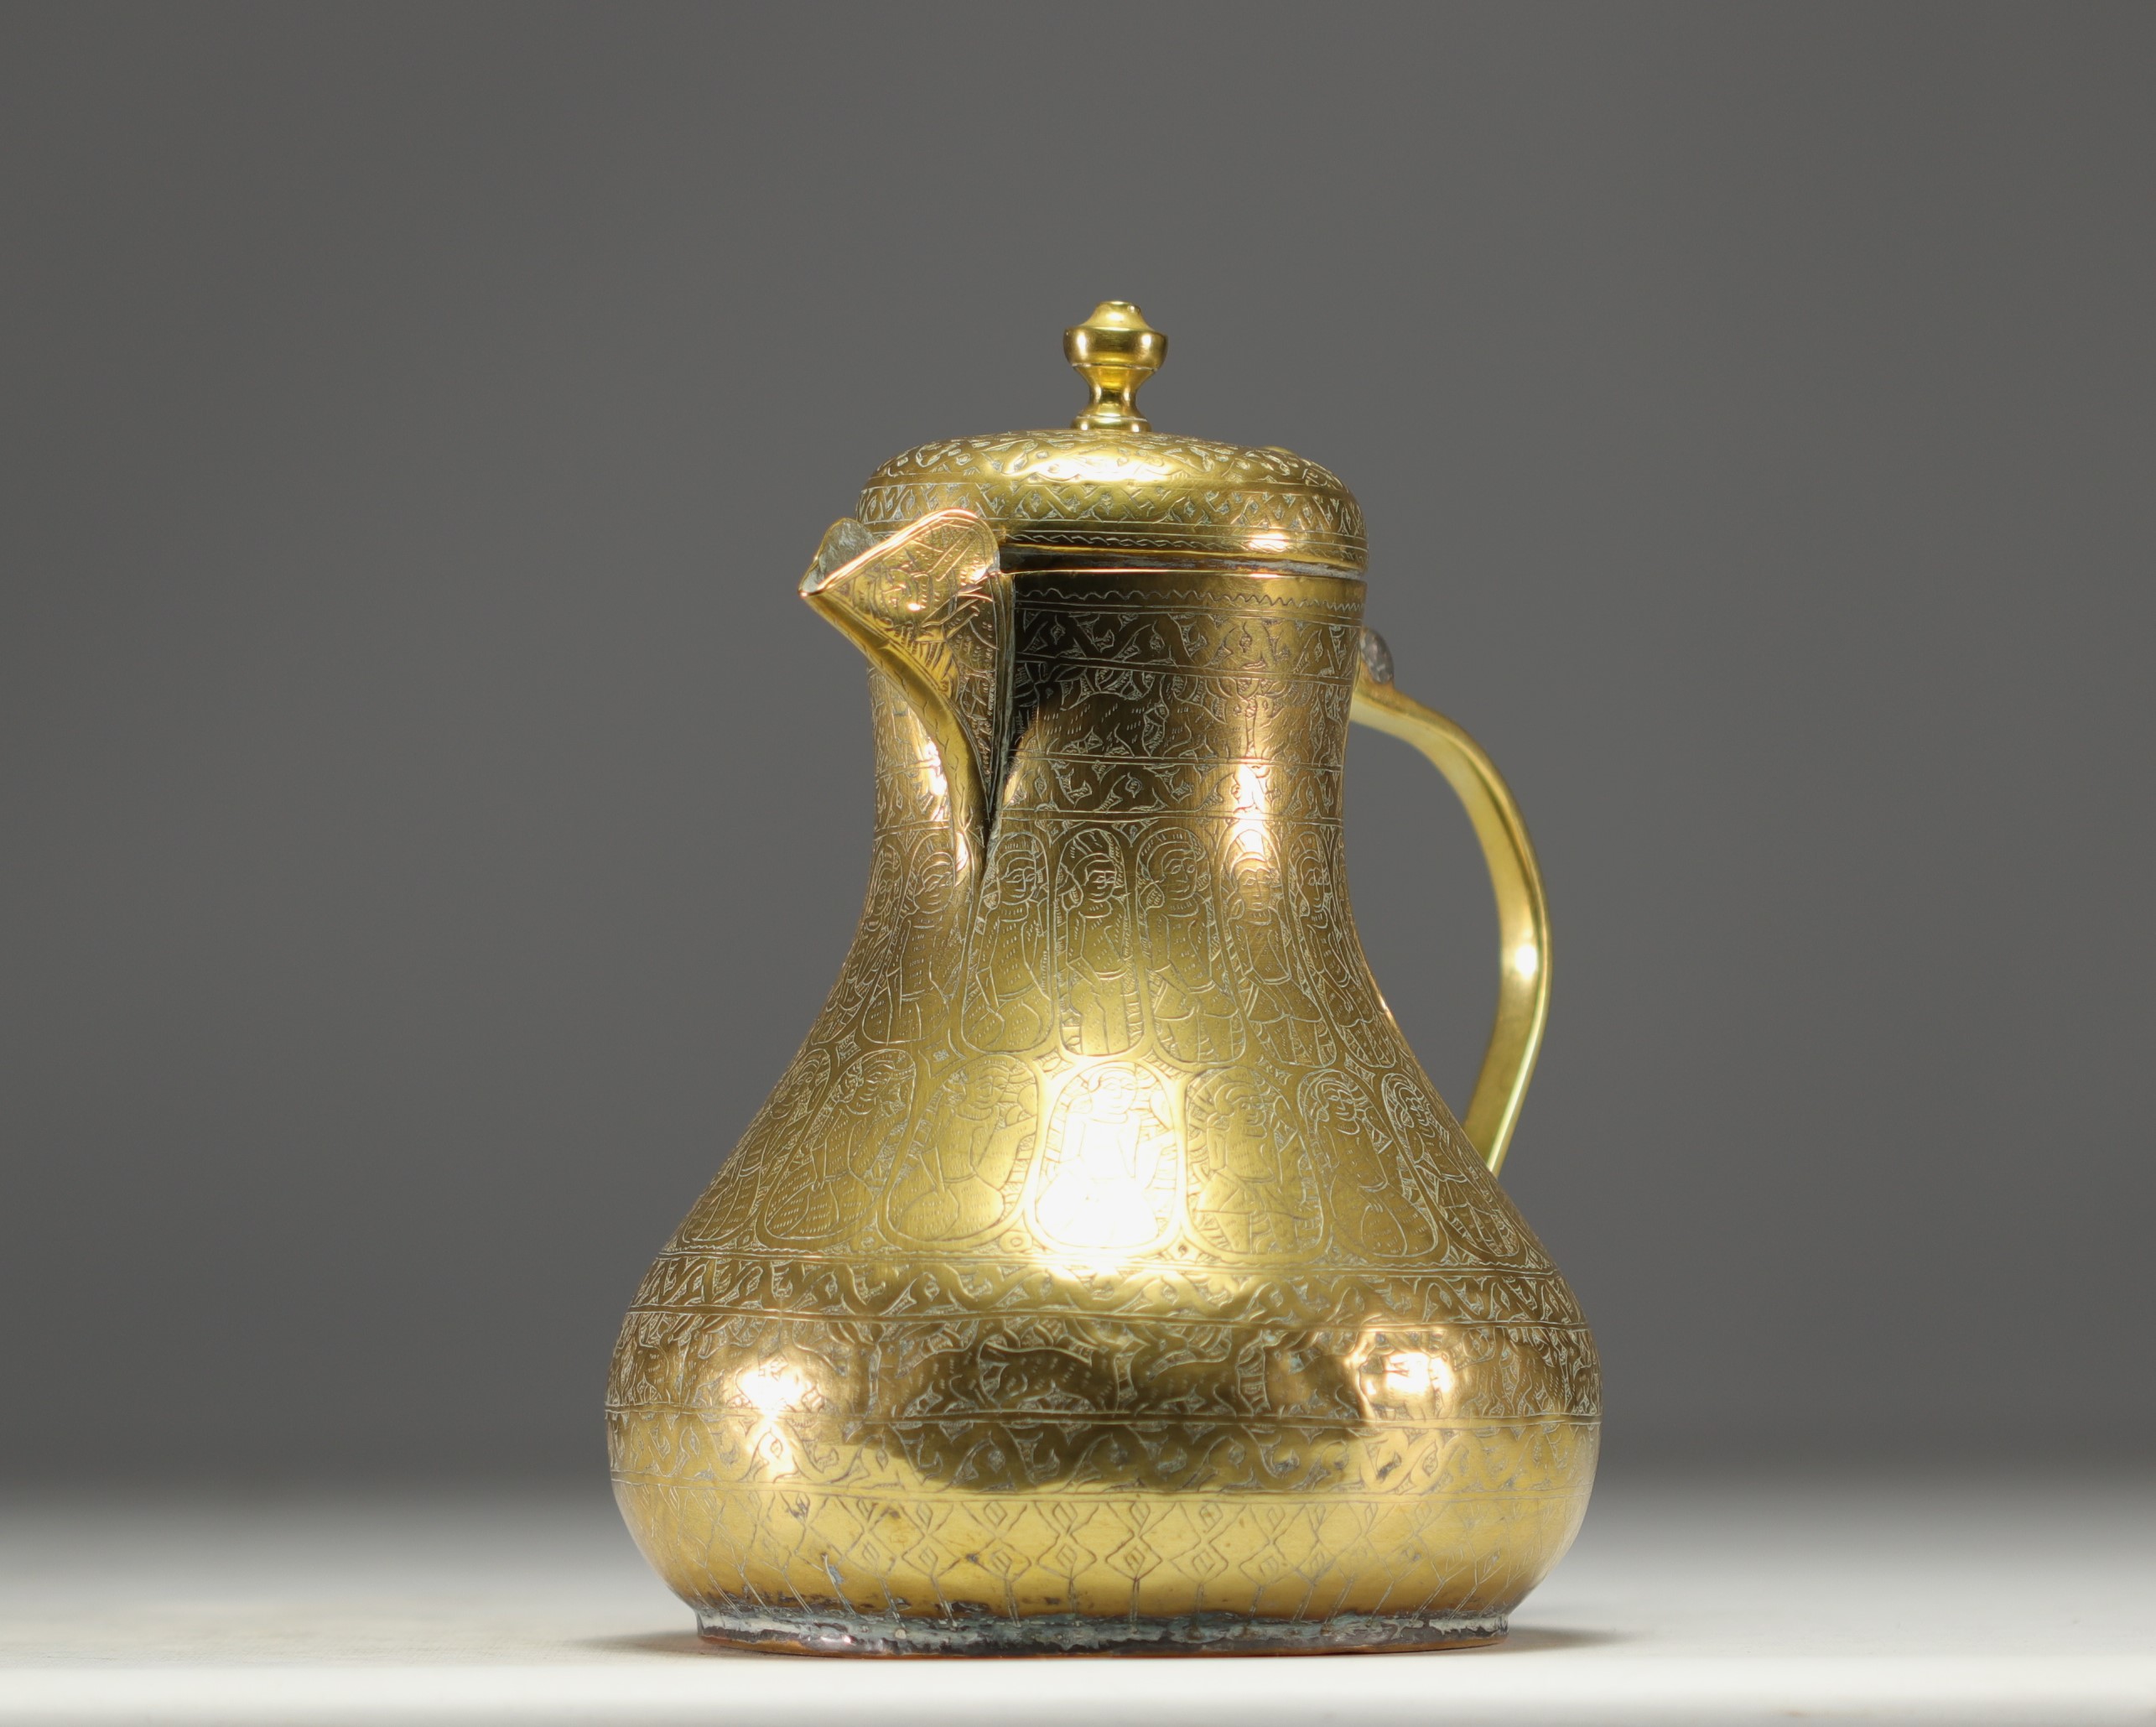 Persian coffee pot in chased brass with animal and figure motifs. - Image 3 of 3